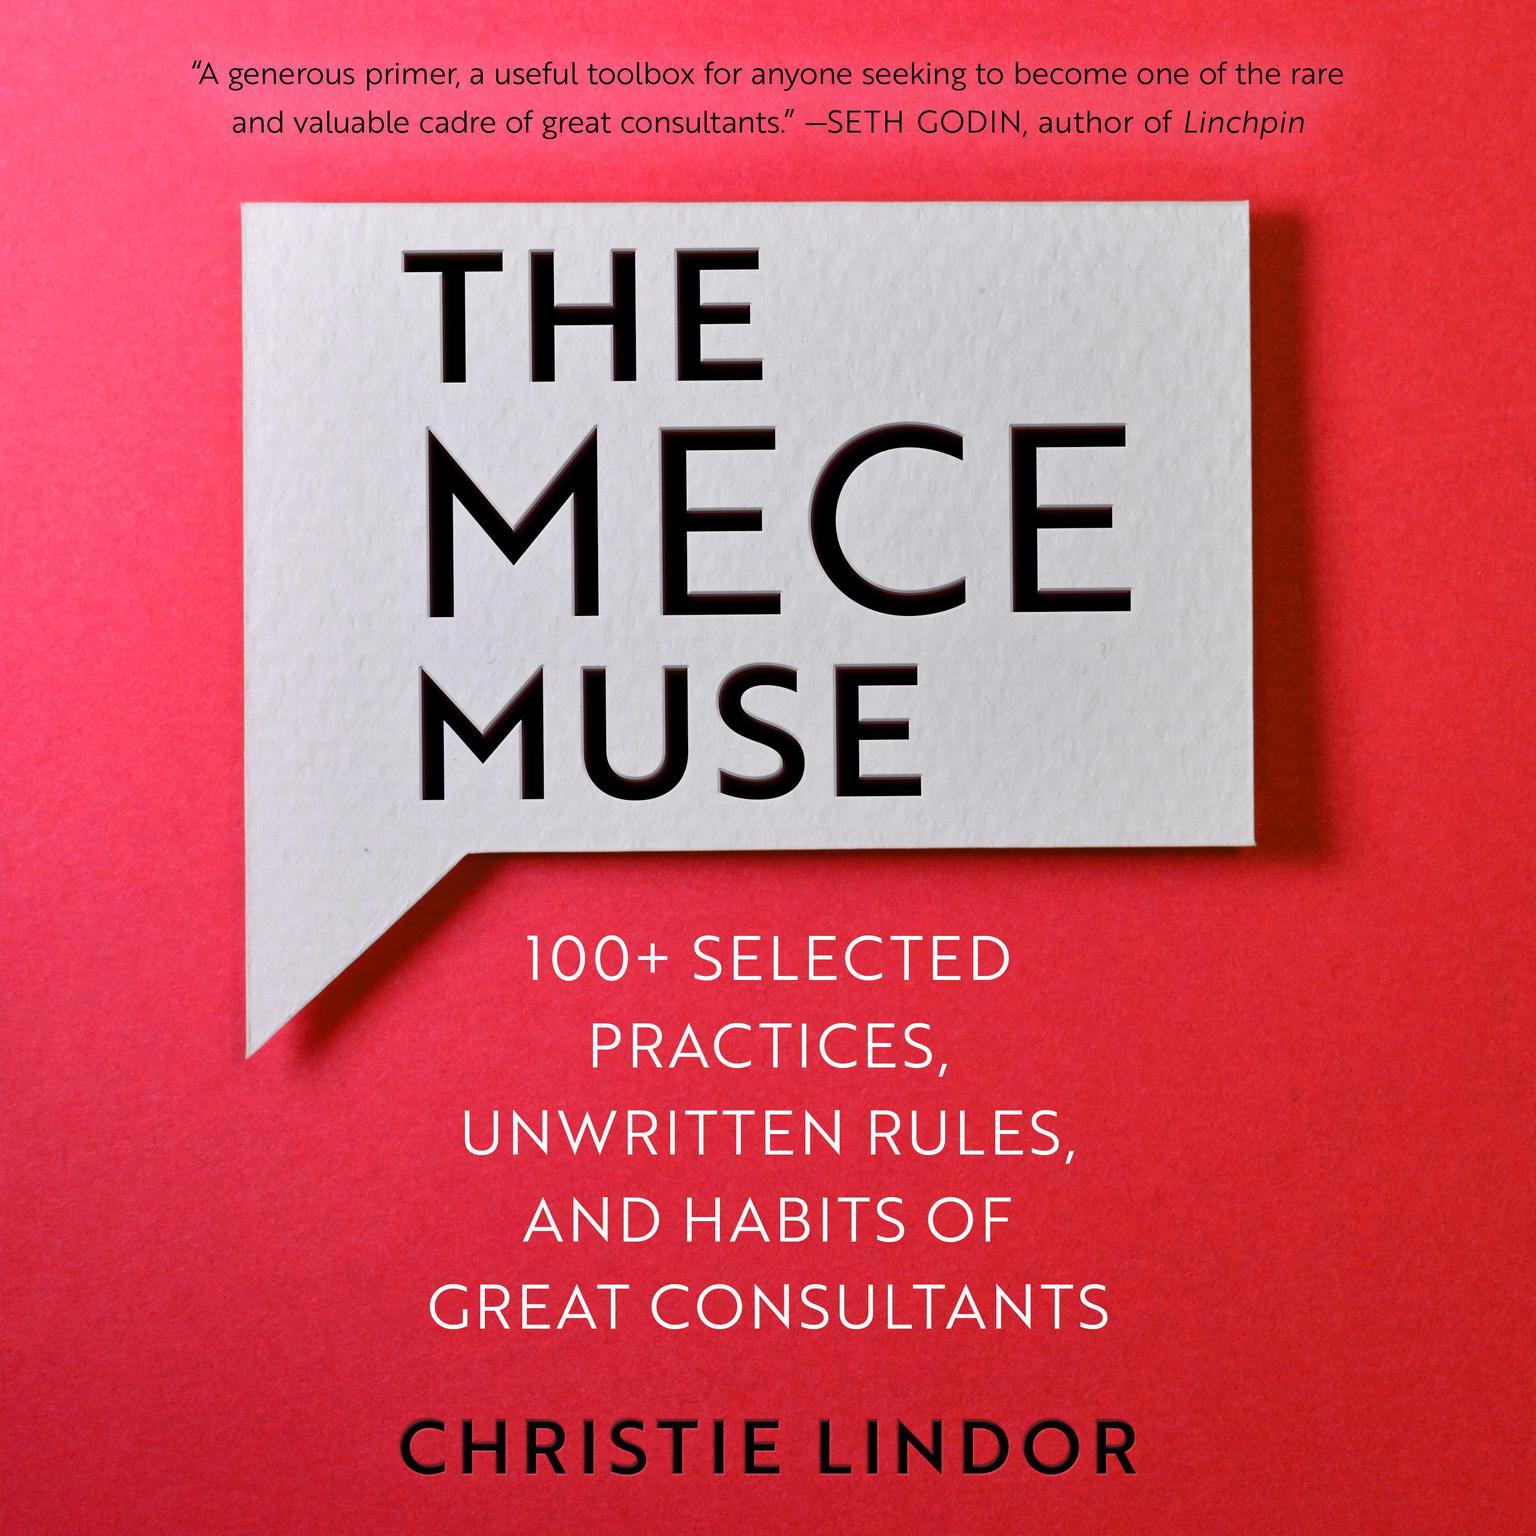 The MECE Muse: 100+ Selected Practices, Unwritten Rules, and Habits of Great Consultants Audiobook, by Christie Lindor